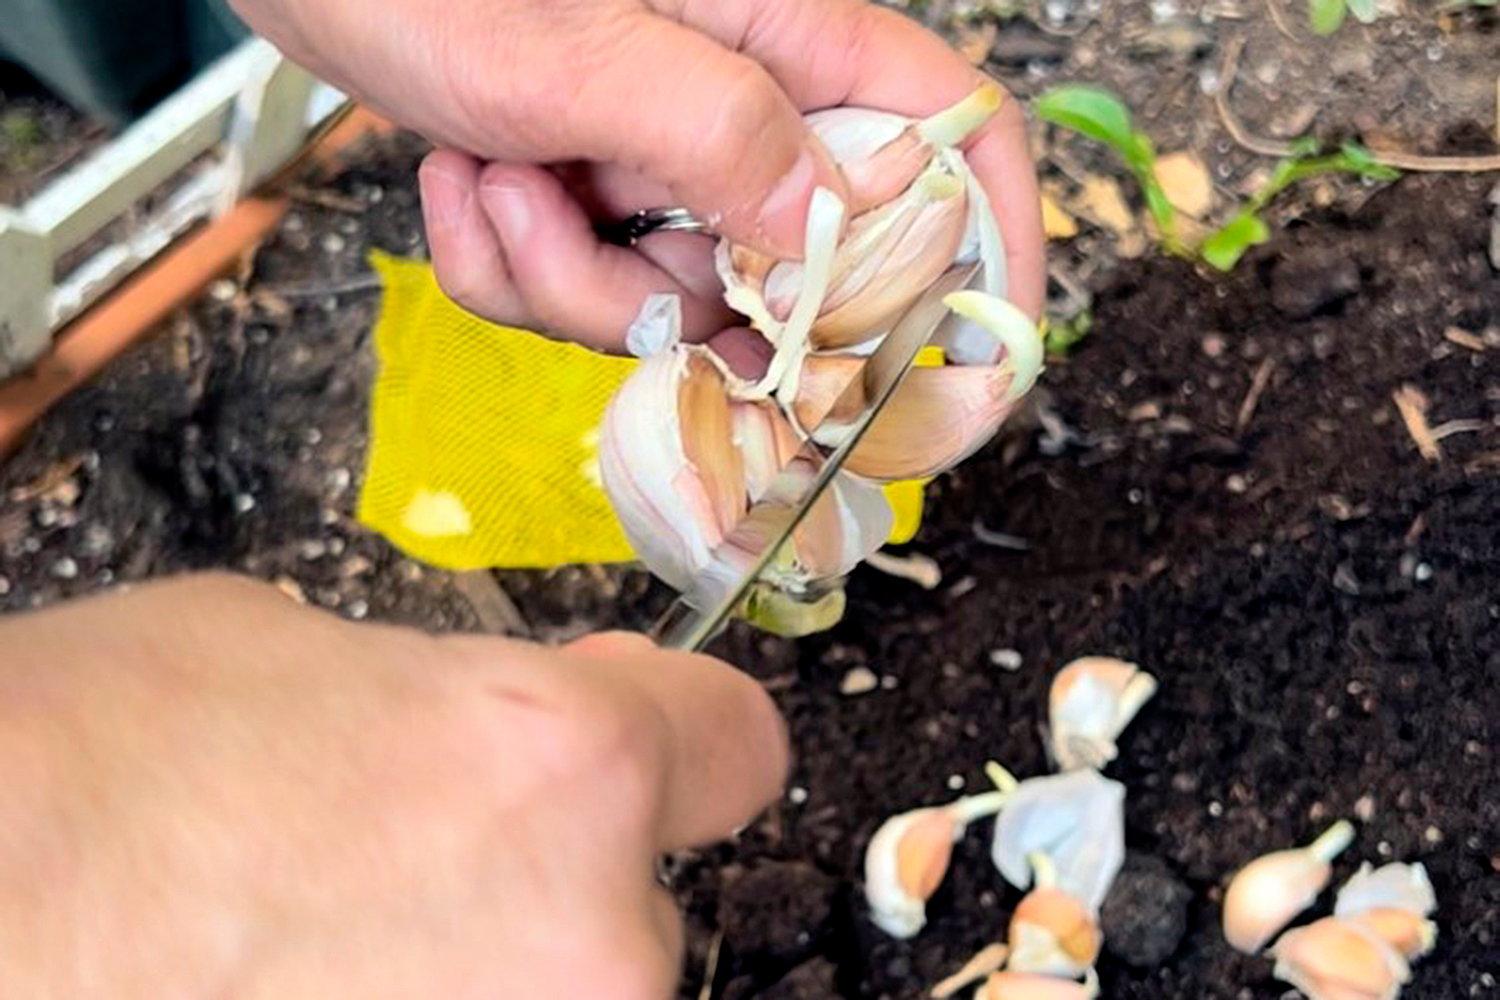 A garlic bulb is separated into cloves for planting.